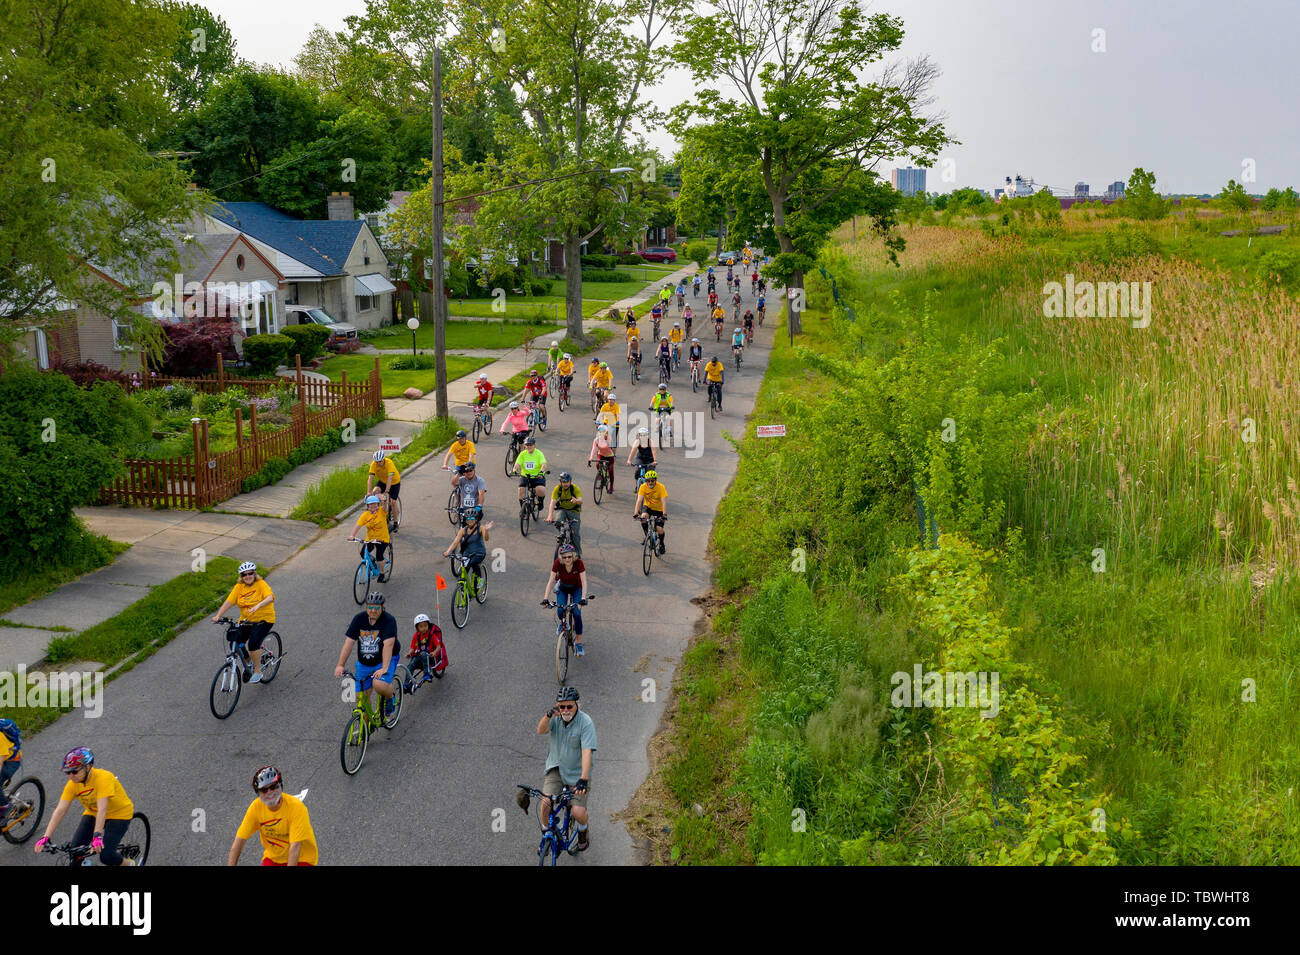 Detroit, Michigan - Hundreds ride in the Tour de Troit, a recreational bicycle ride through Detroit. The ride was 20 miles through east side neighborh Stock Photo